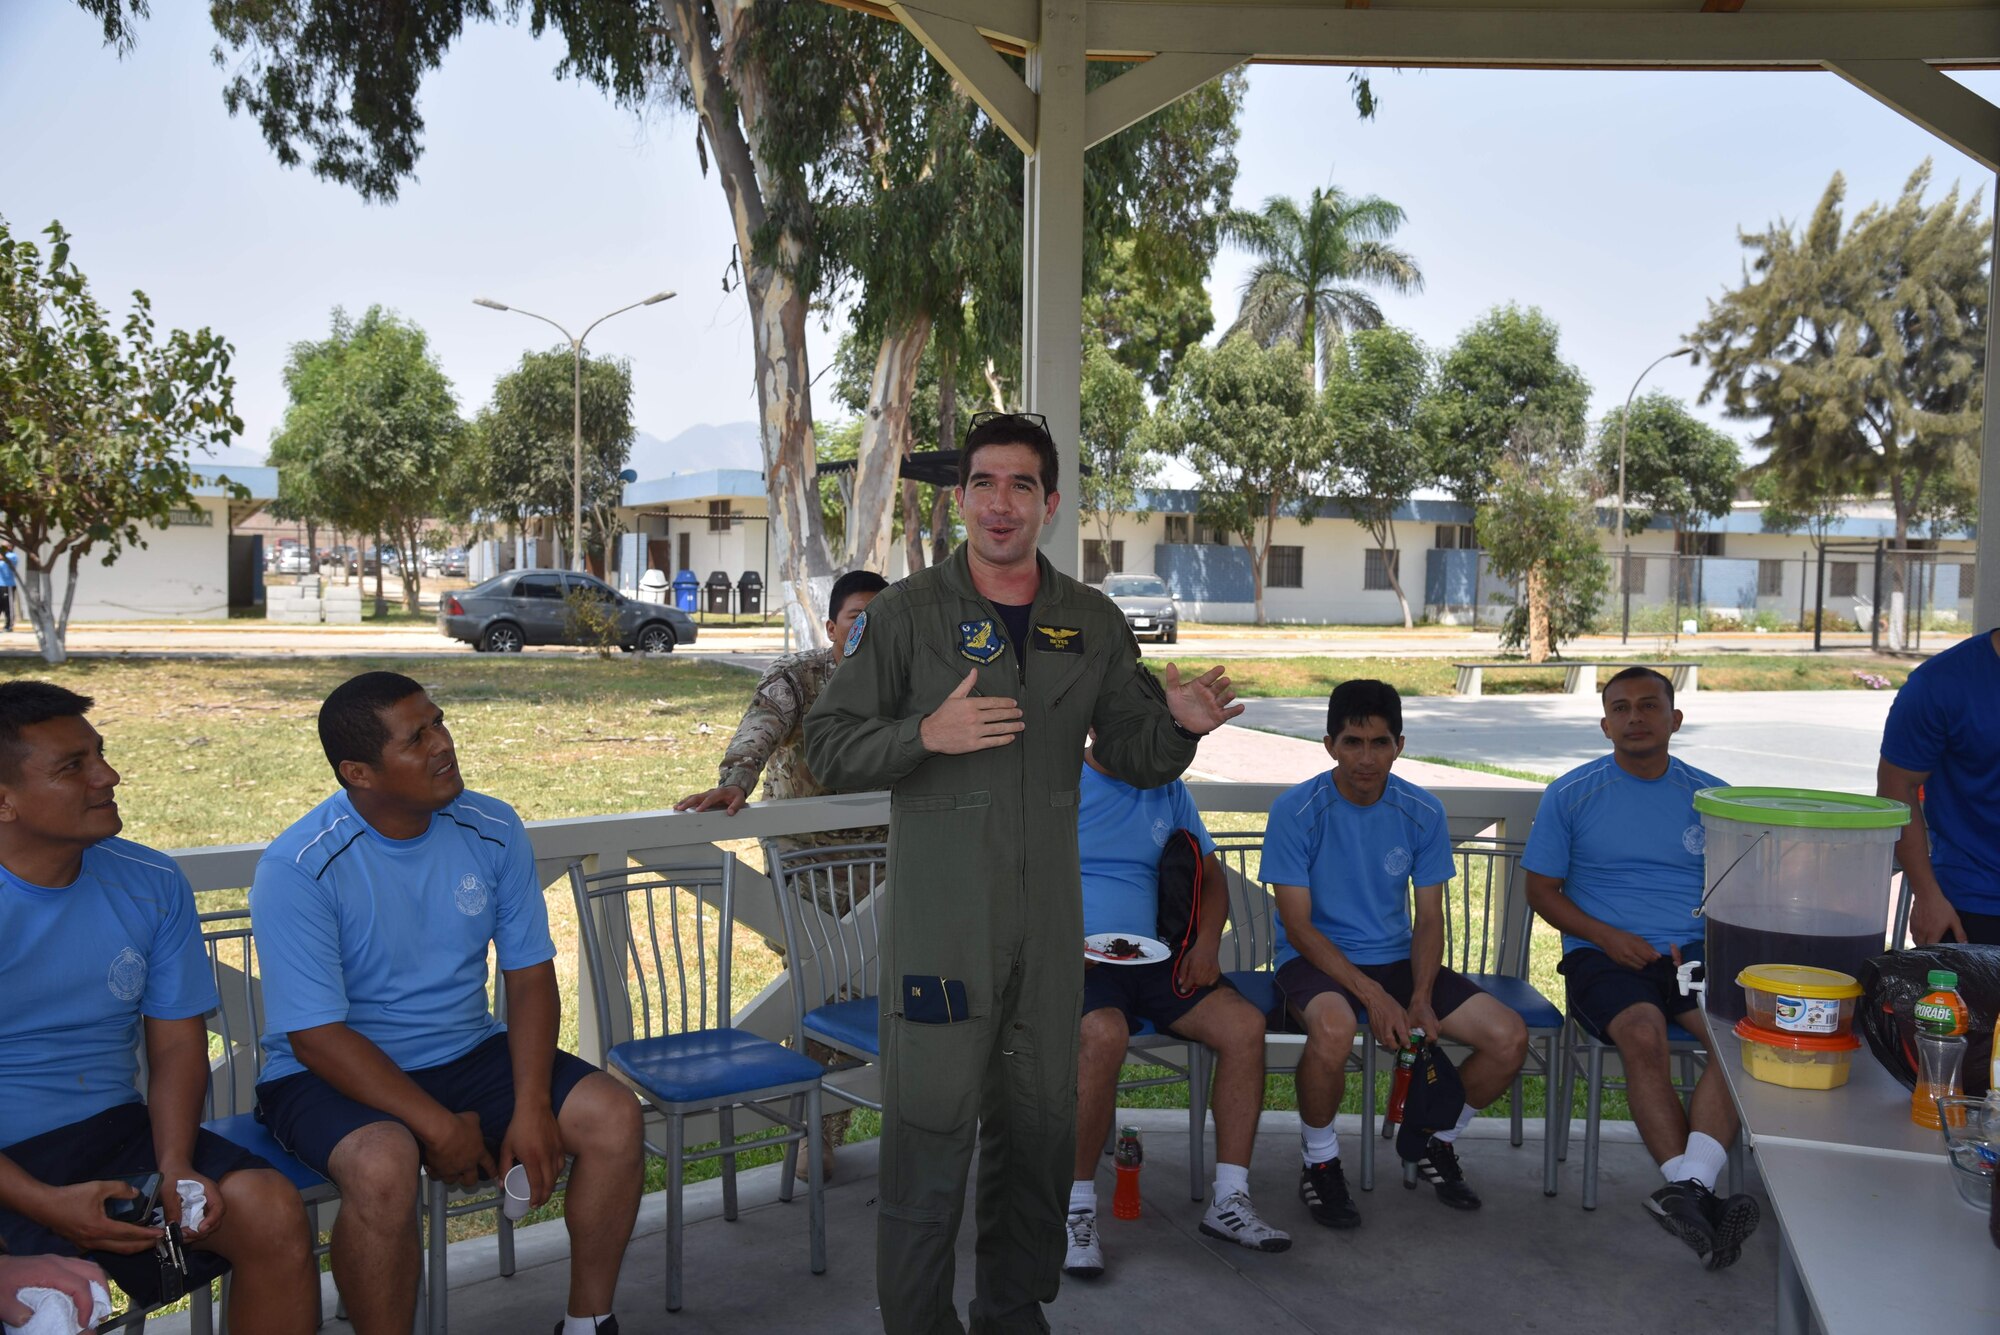 Peruvian Air Force Lt. Alfonso Reyes gives a short speech thanking instructors from the 571st Mobility Support Advisory Squadron at Callao Air Base in Lima, Perú. The 571st MSAS is a language enabled squadron of air advisors who assess, train, advise and assist Latin American and Caribbean partner nations in the development of their airpower capabilities as part of the U.S. Air Force’s and Air Mobility Command’s enduring building partner capacity mission. (courtesy photo)